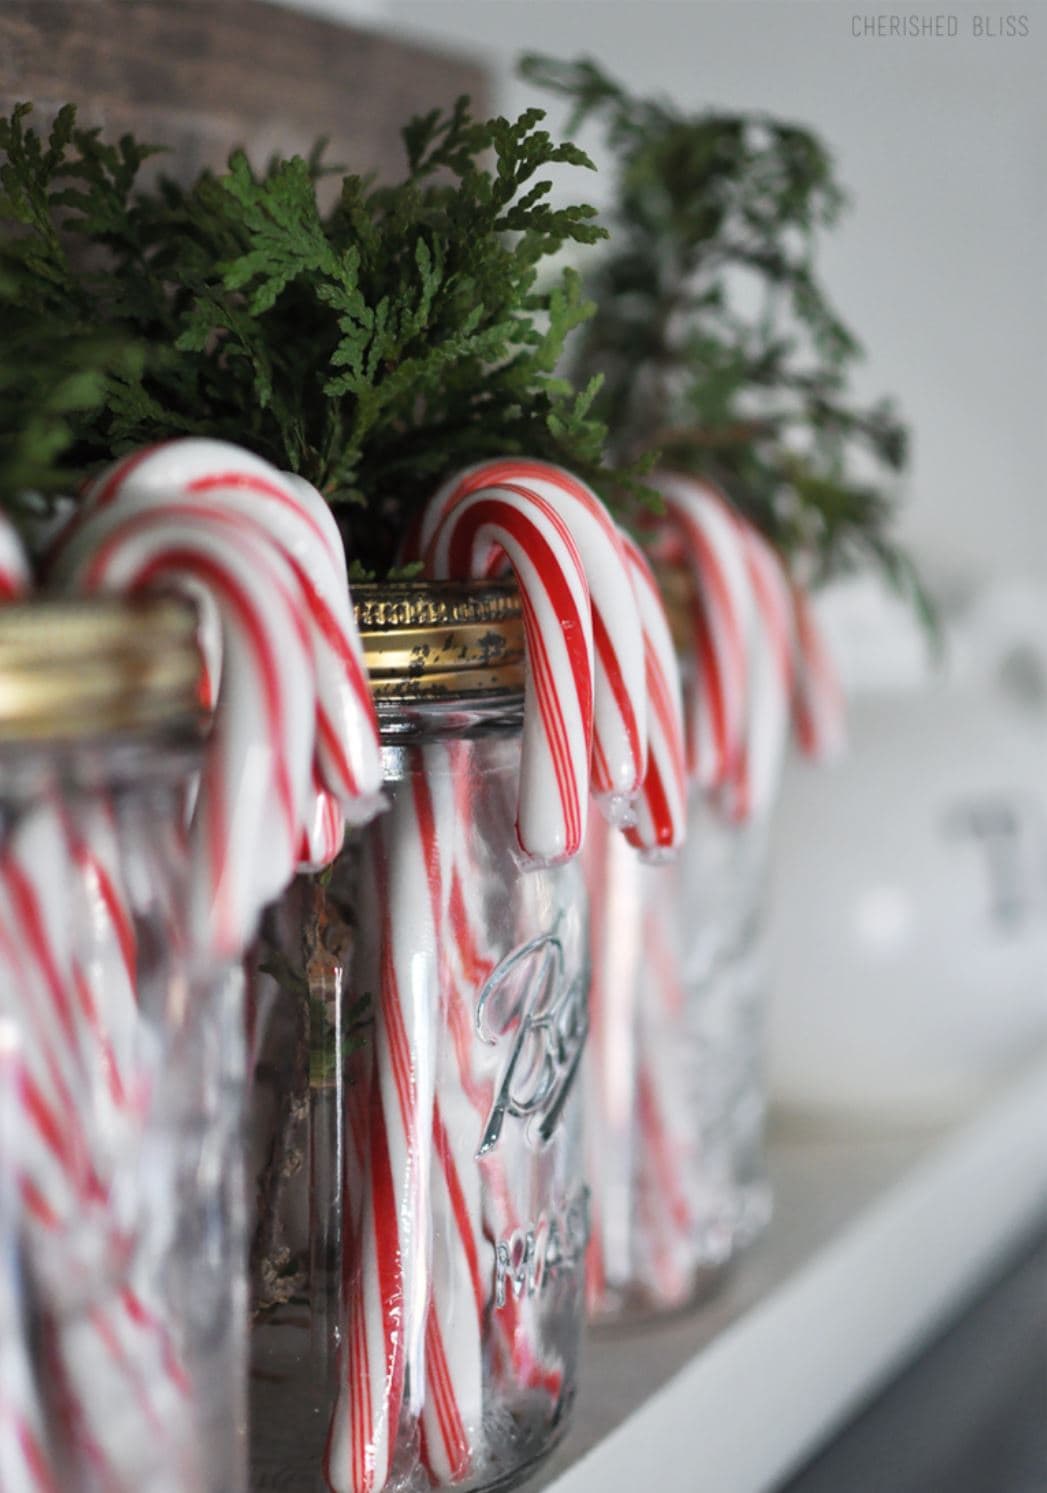 Candy canes and evergreen inside mason jars.